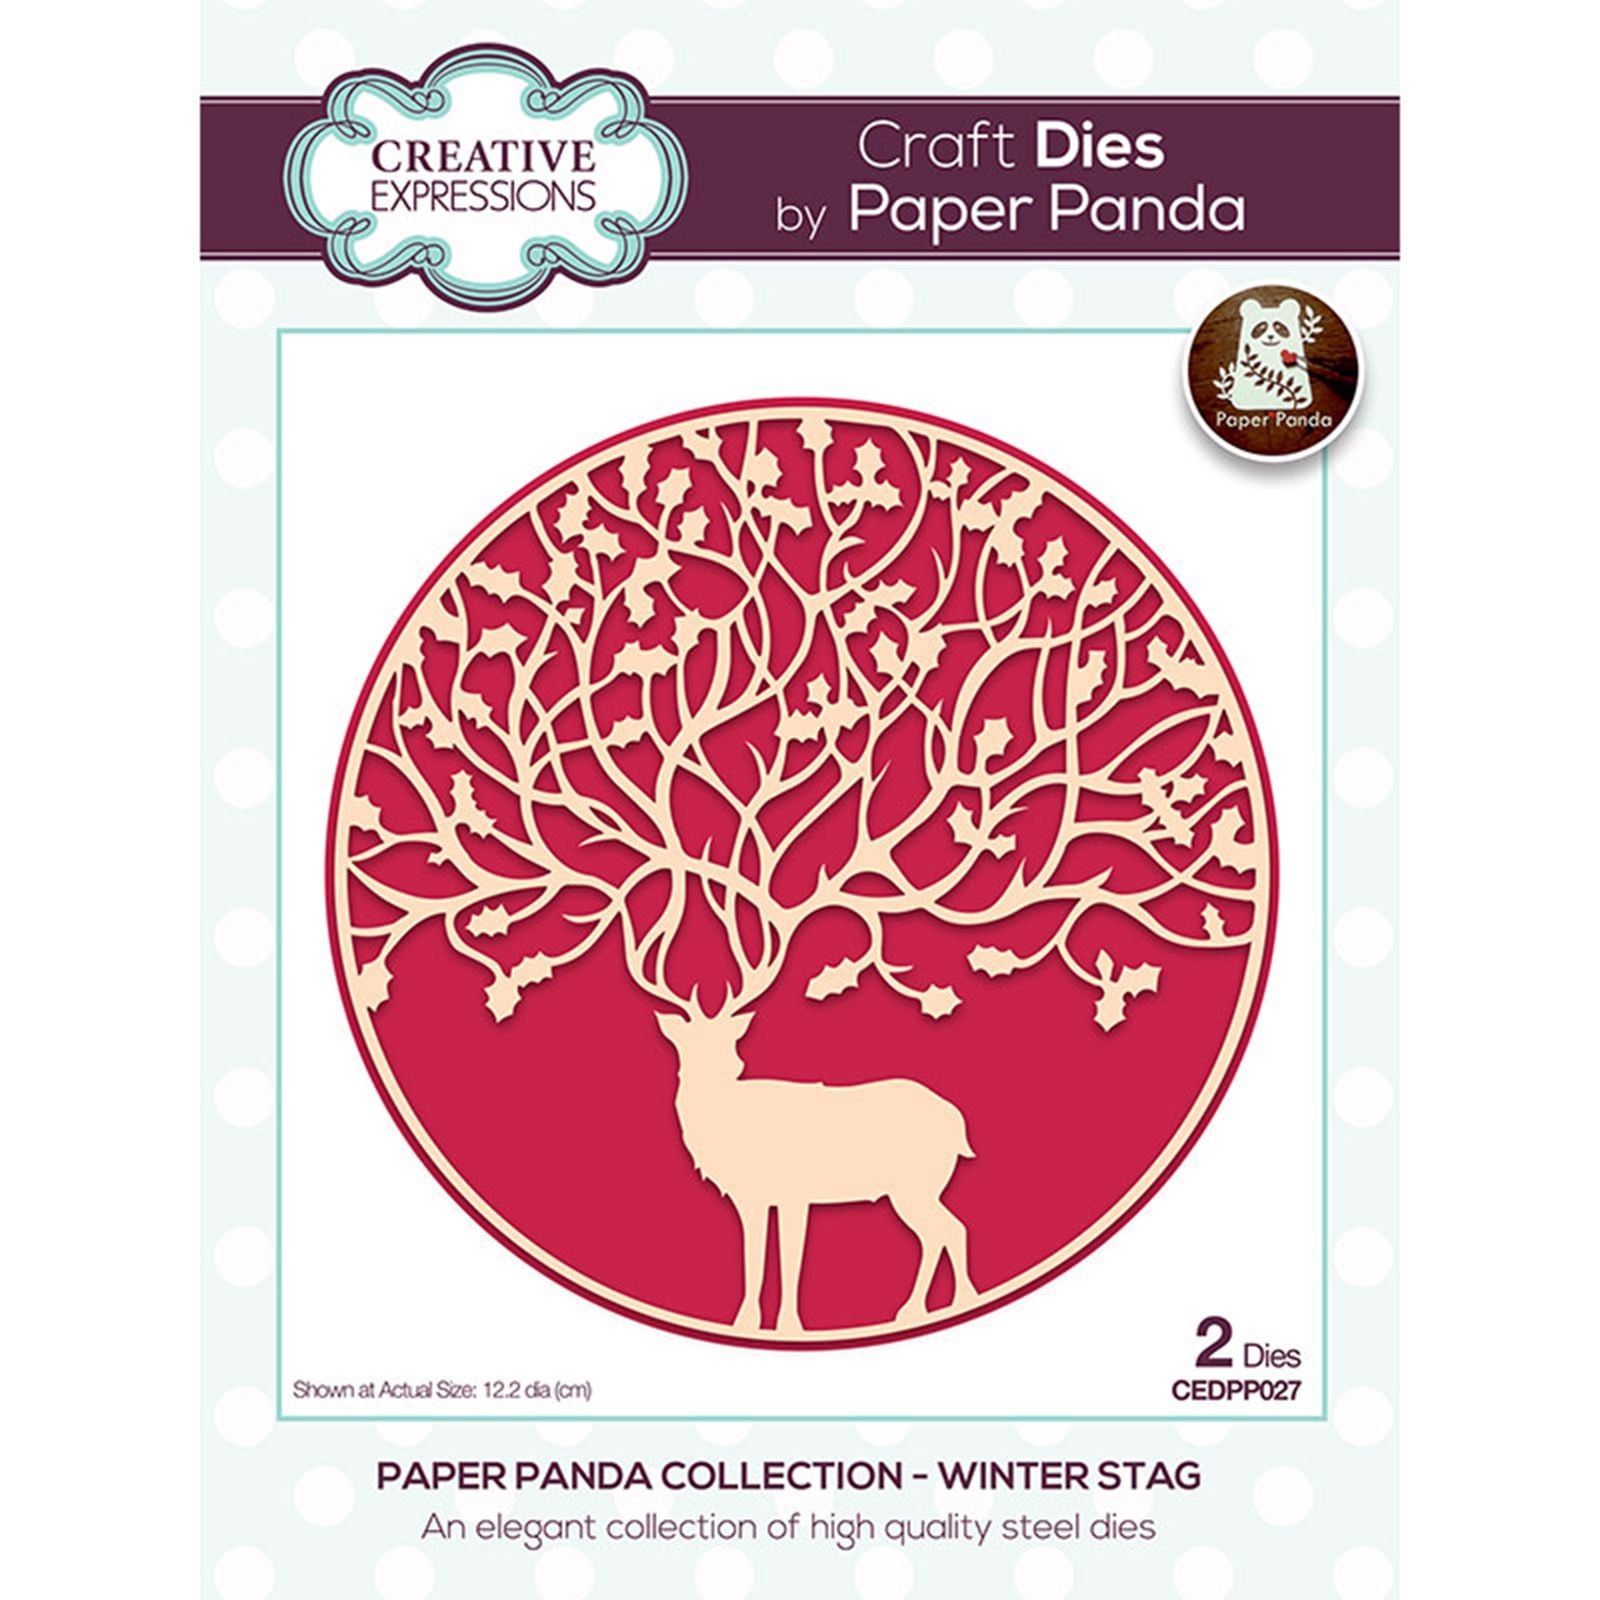 Creative Expressions • Paper panda craft die Winter stag